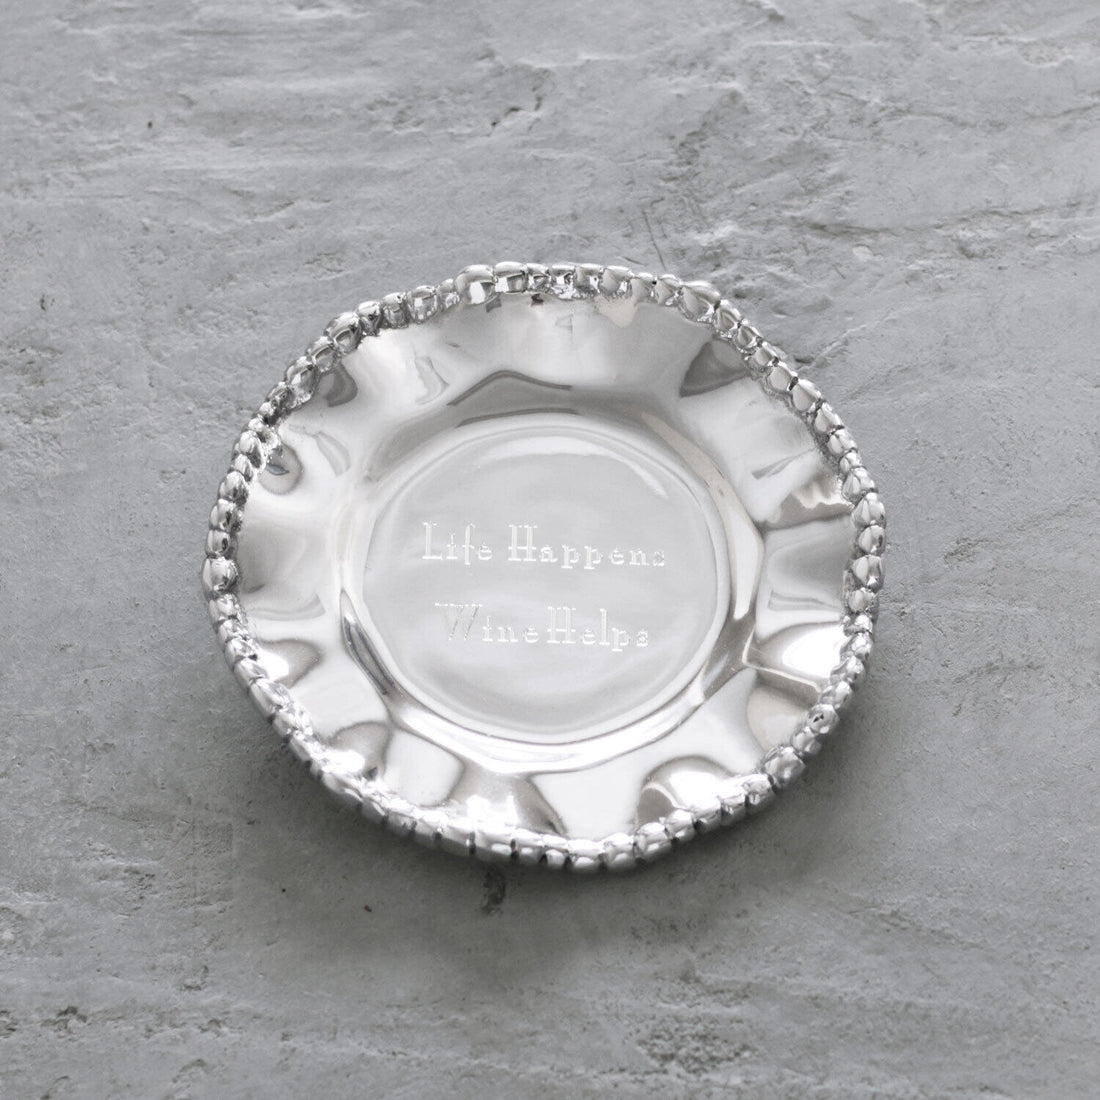 GIFTABLES Organic Pearl Round Wine Plate - Life Happens, Wine Helps